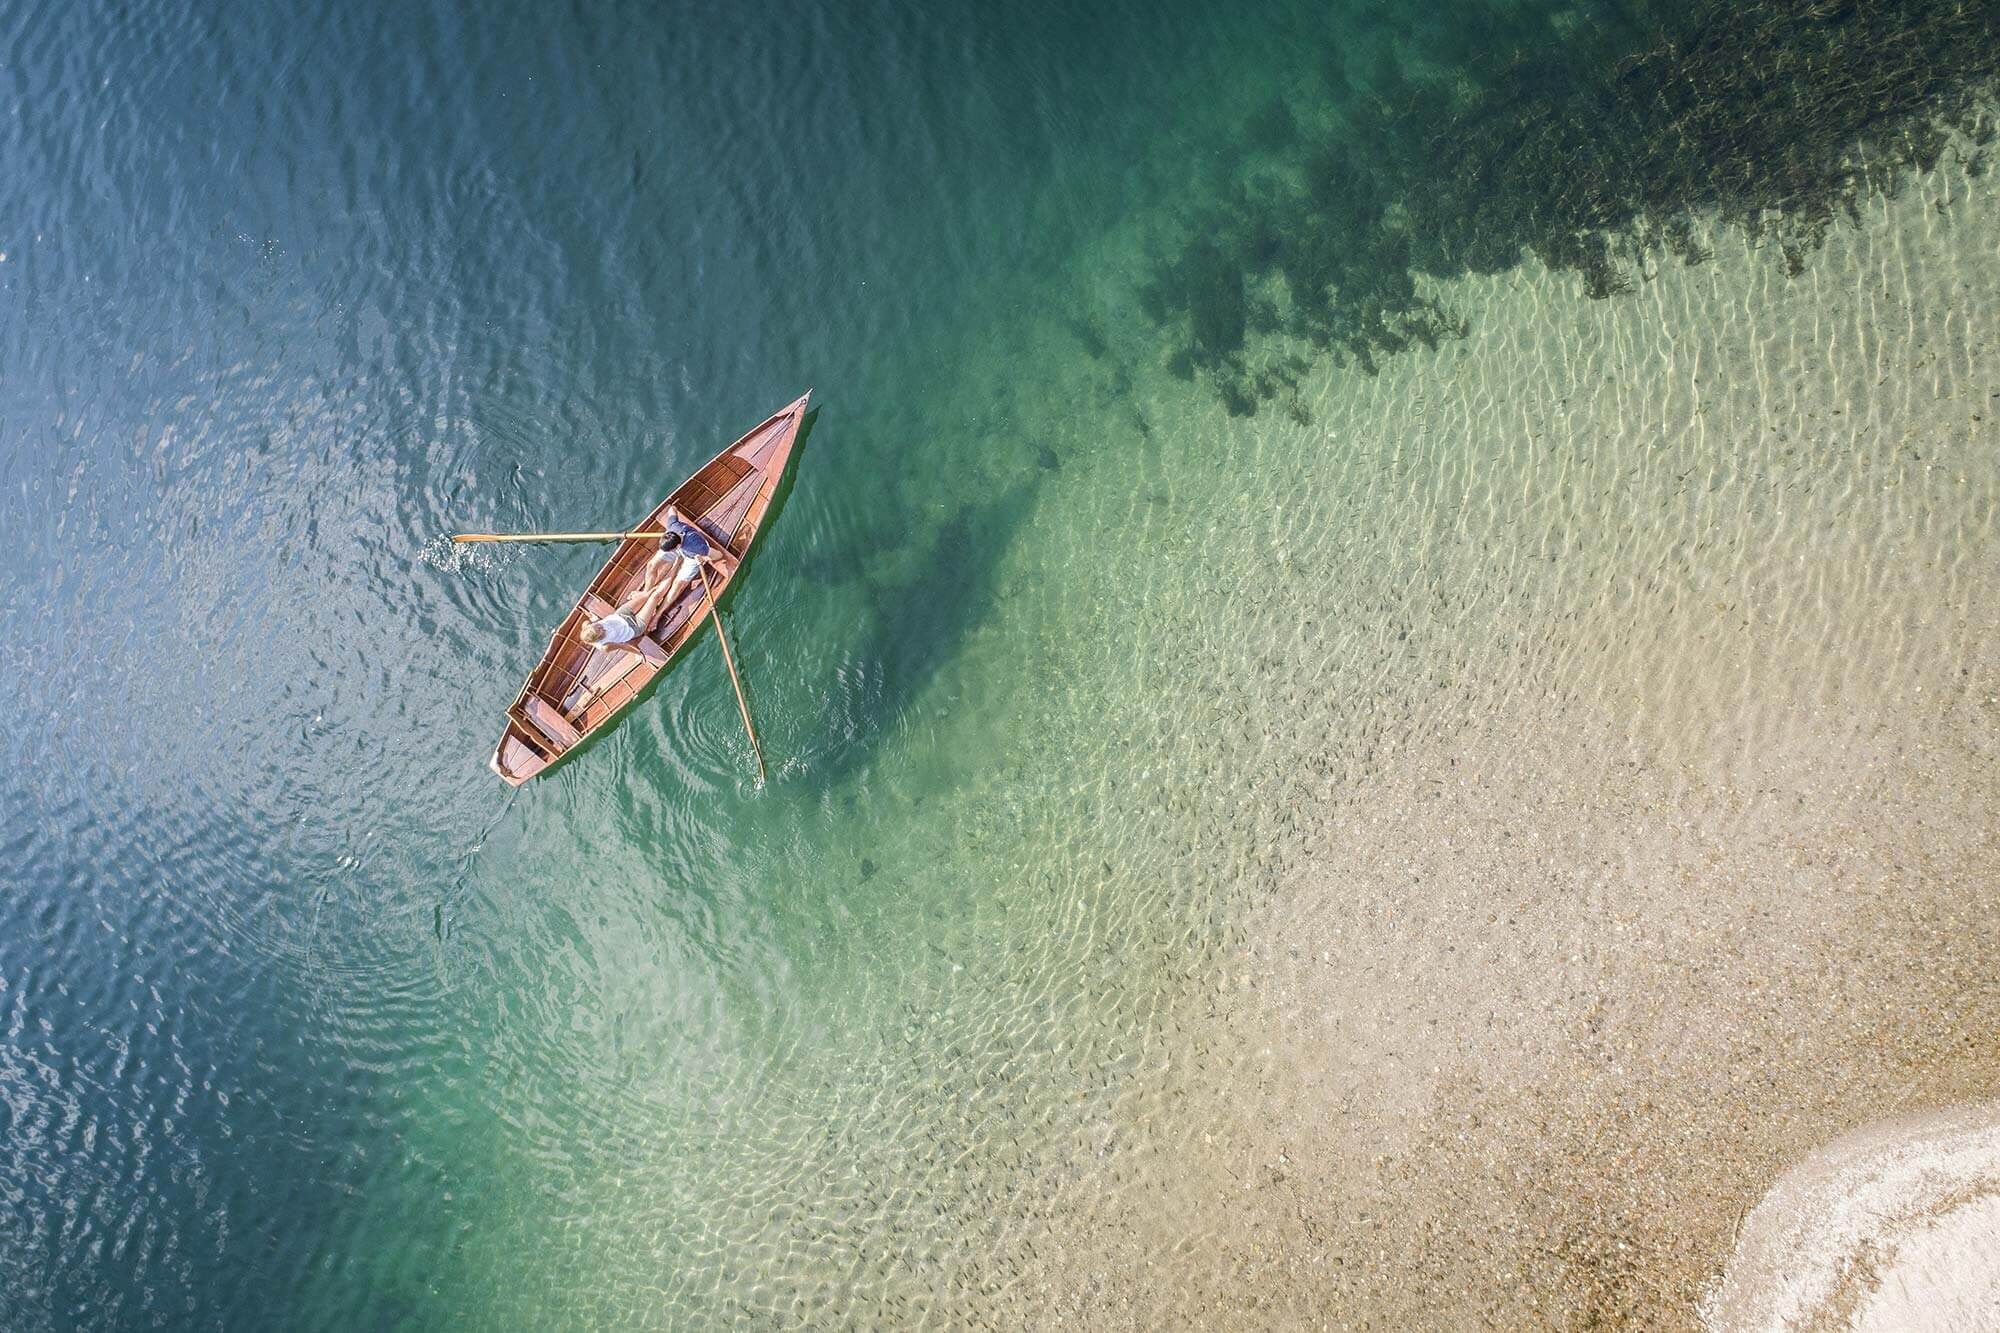 A boat floats on the blue water next to a sandy beach